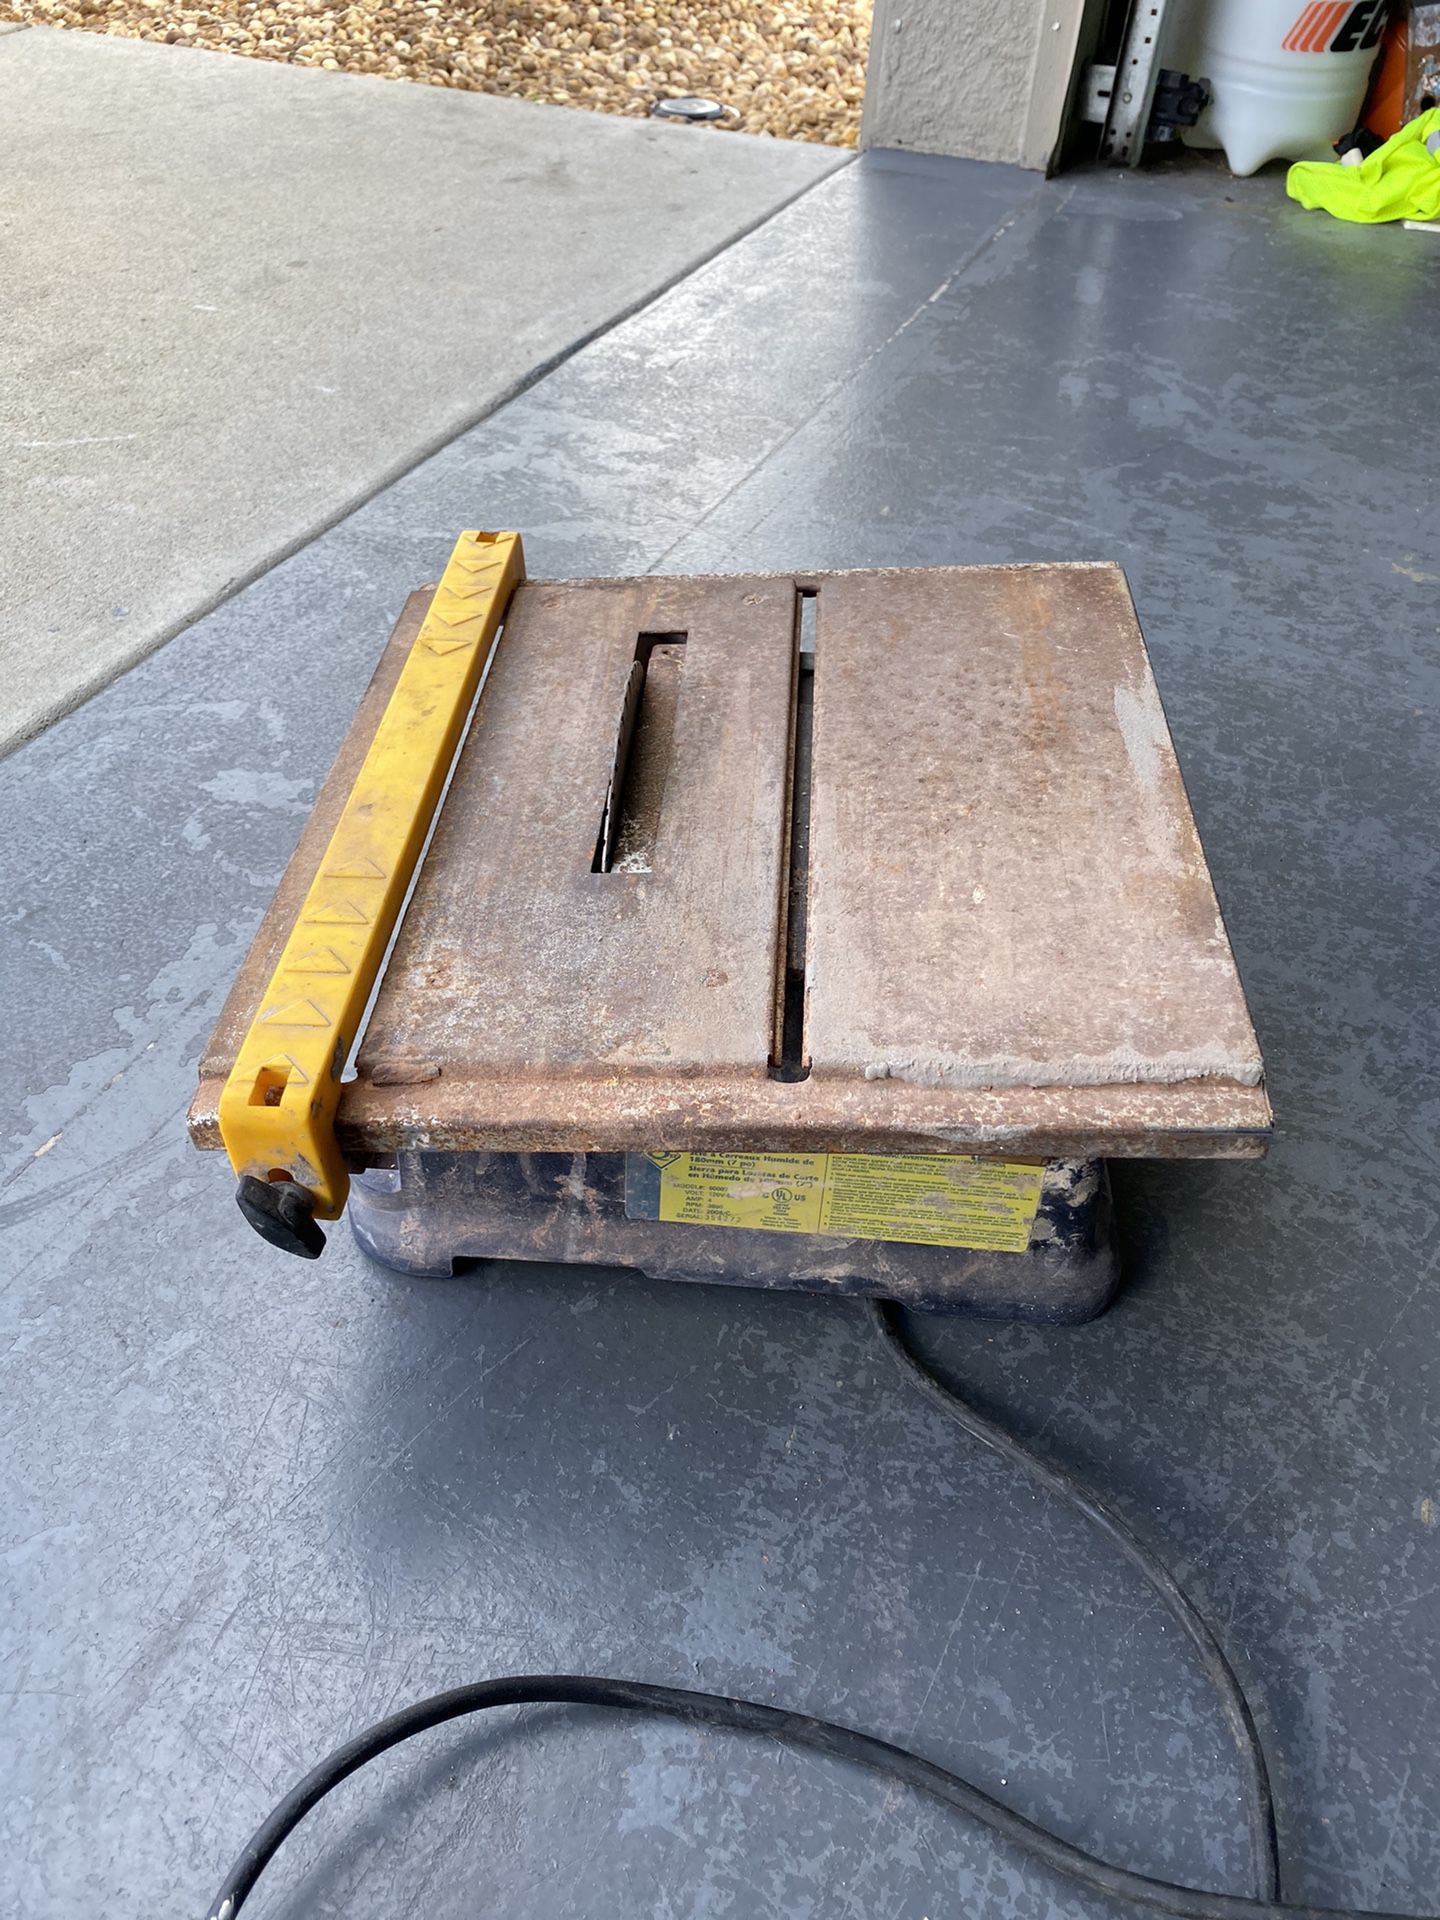 Small tile cutter